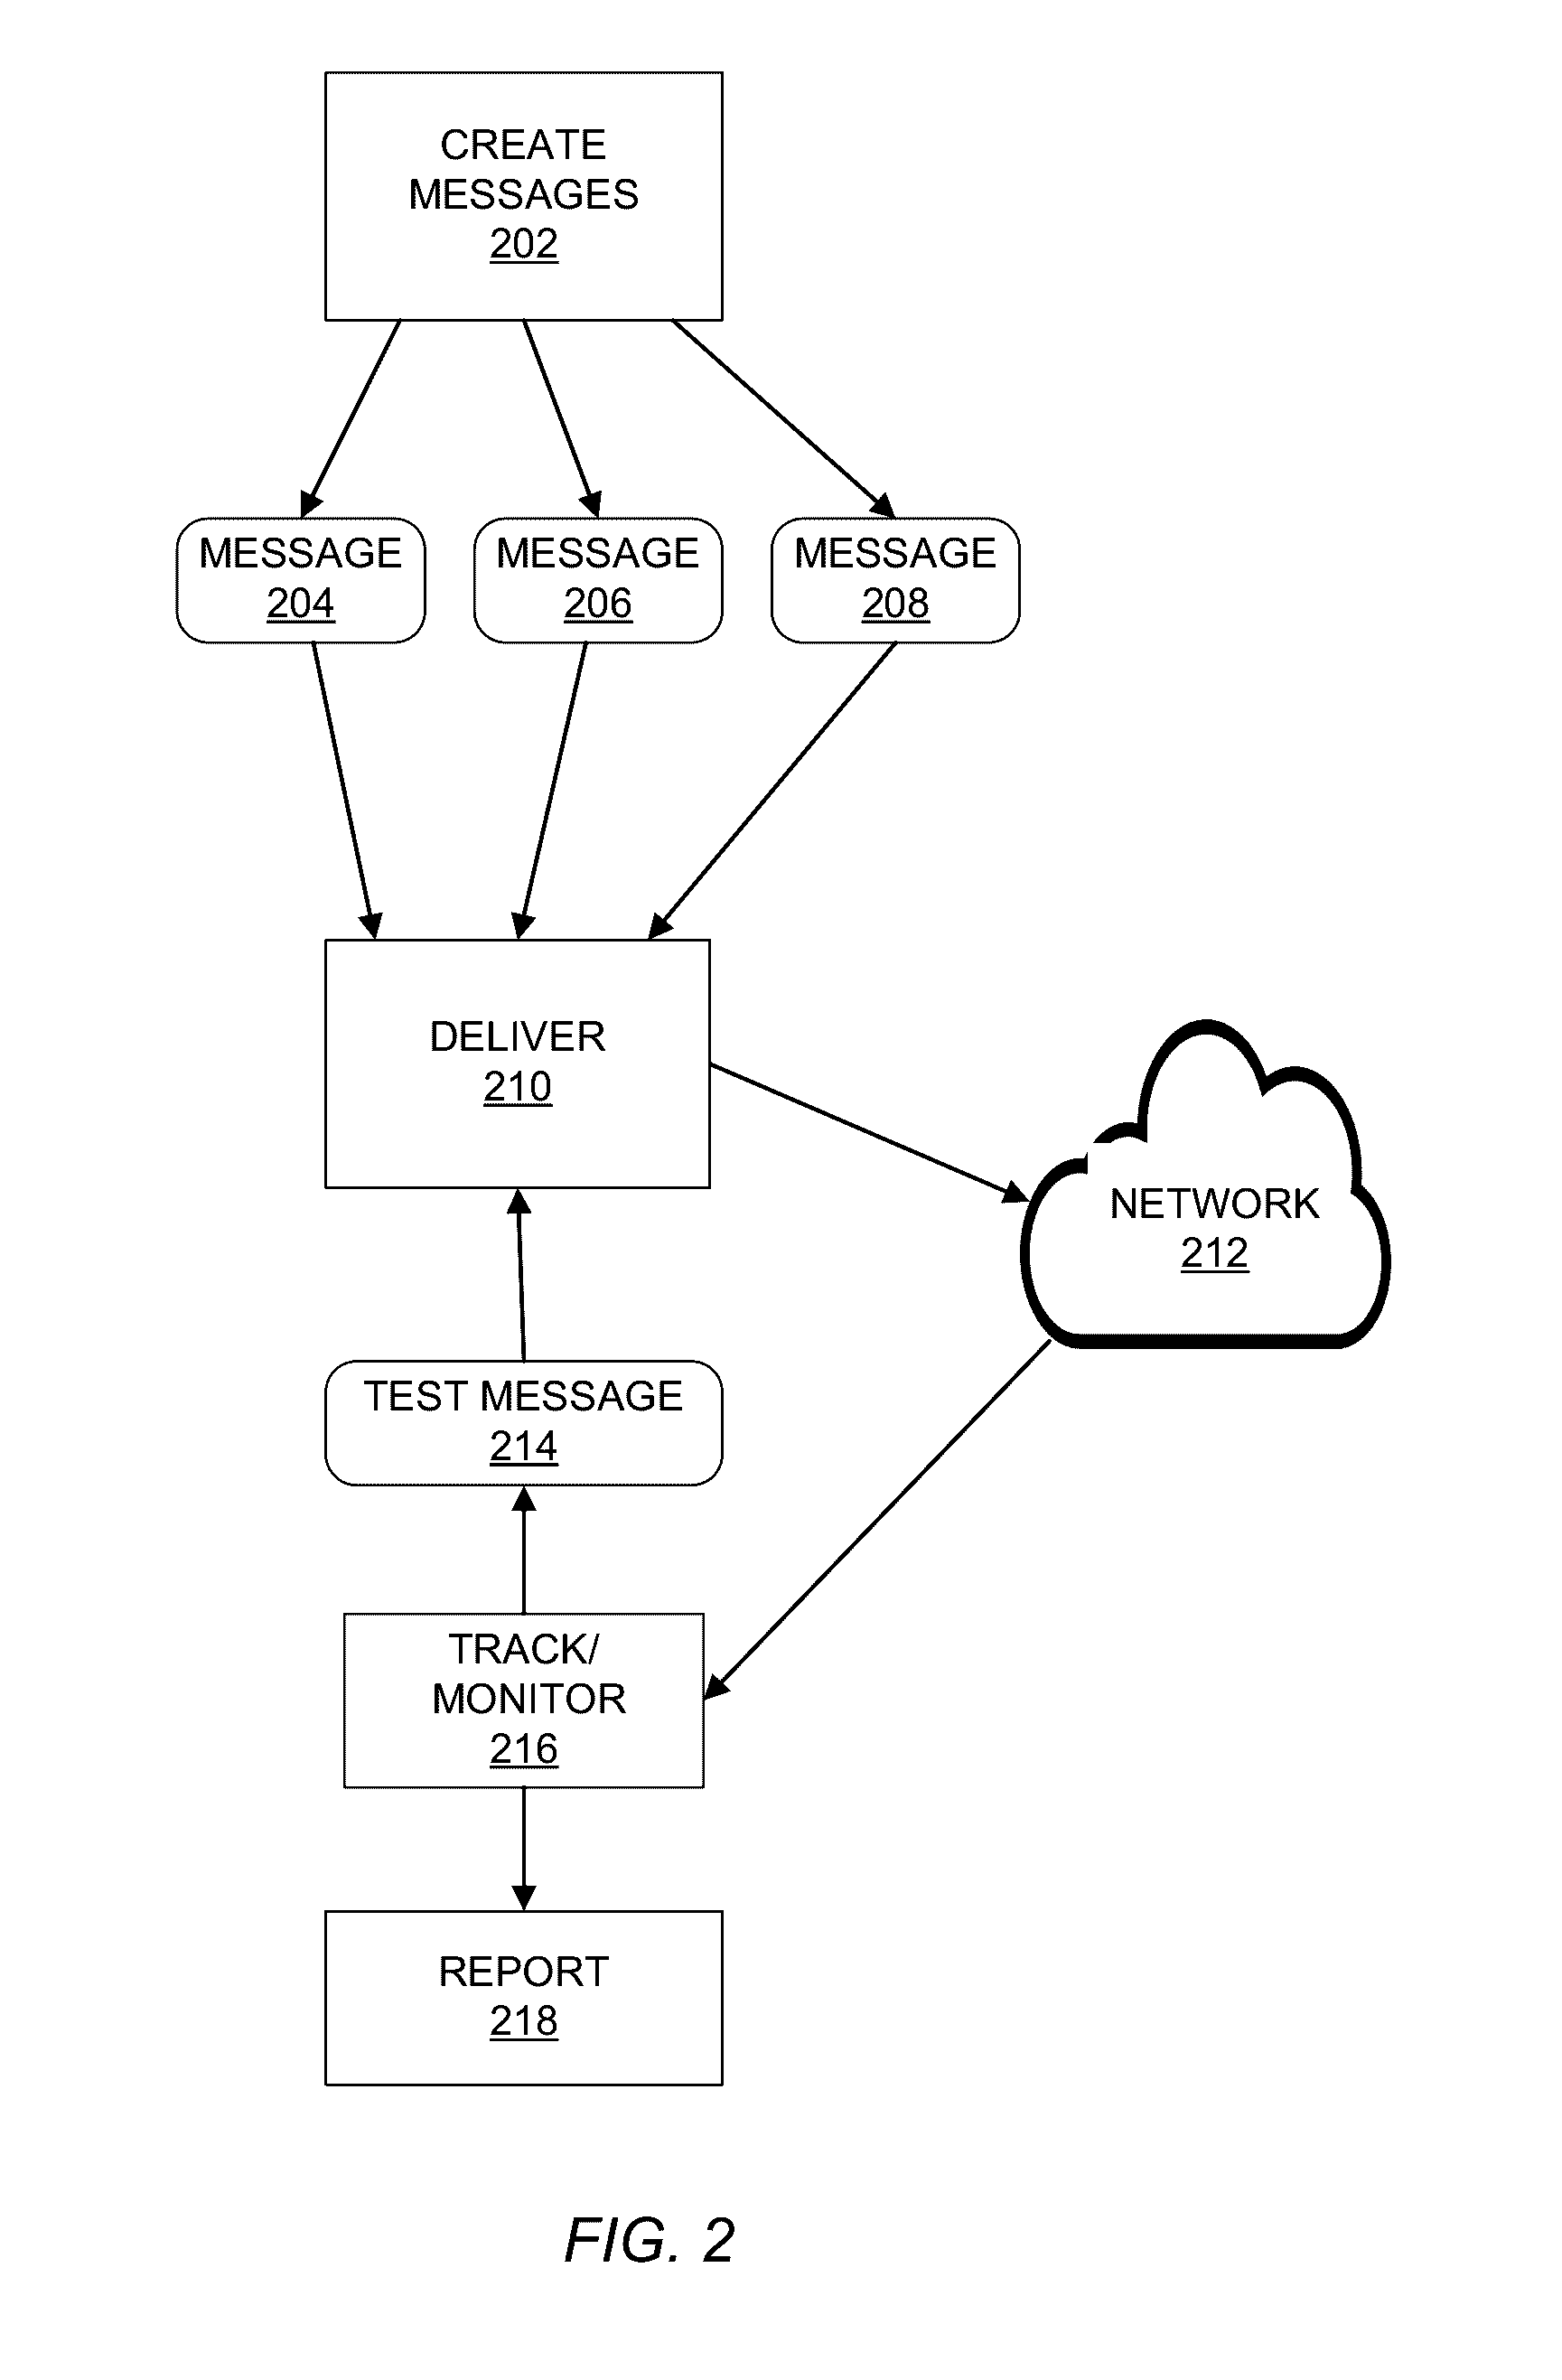 Systems and methods for creation, delivery and tracking of electronic messages